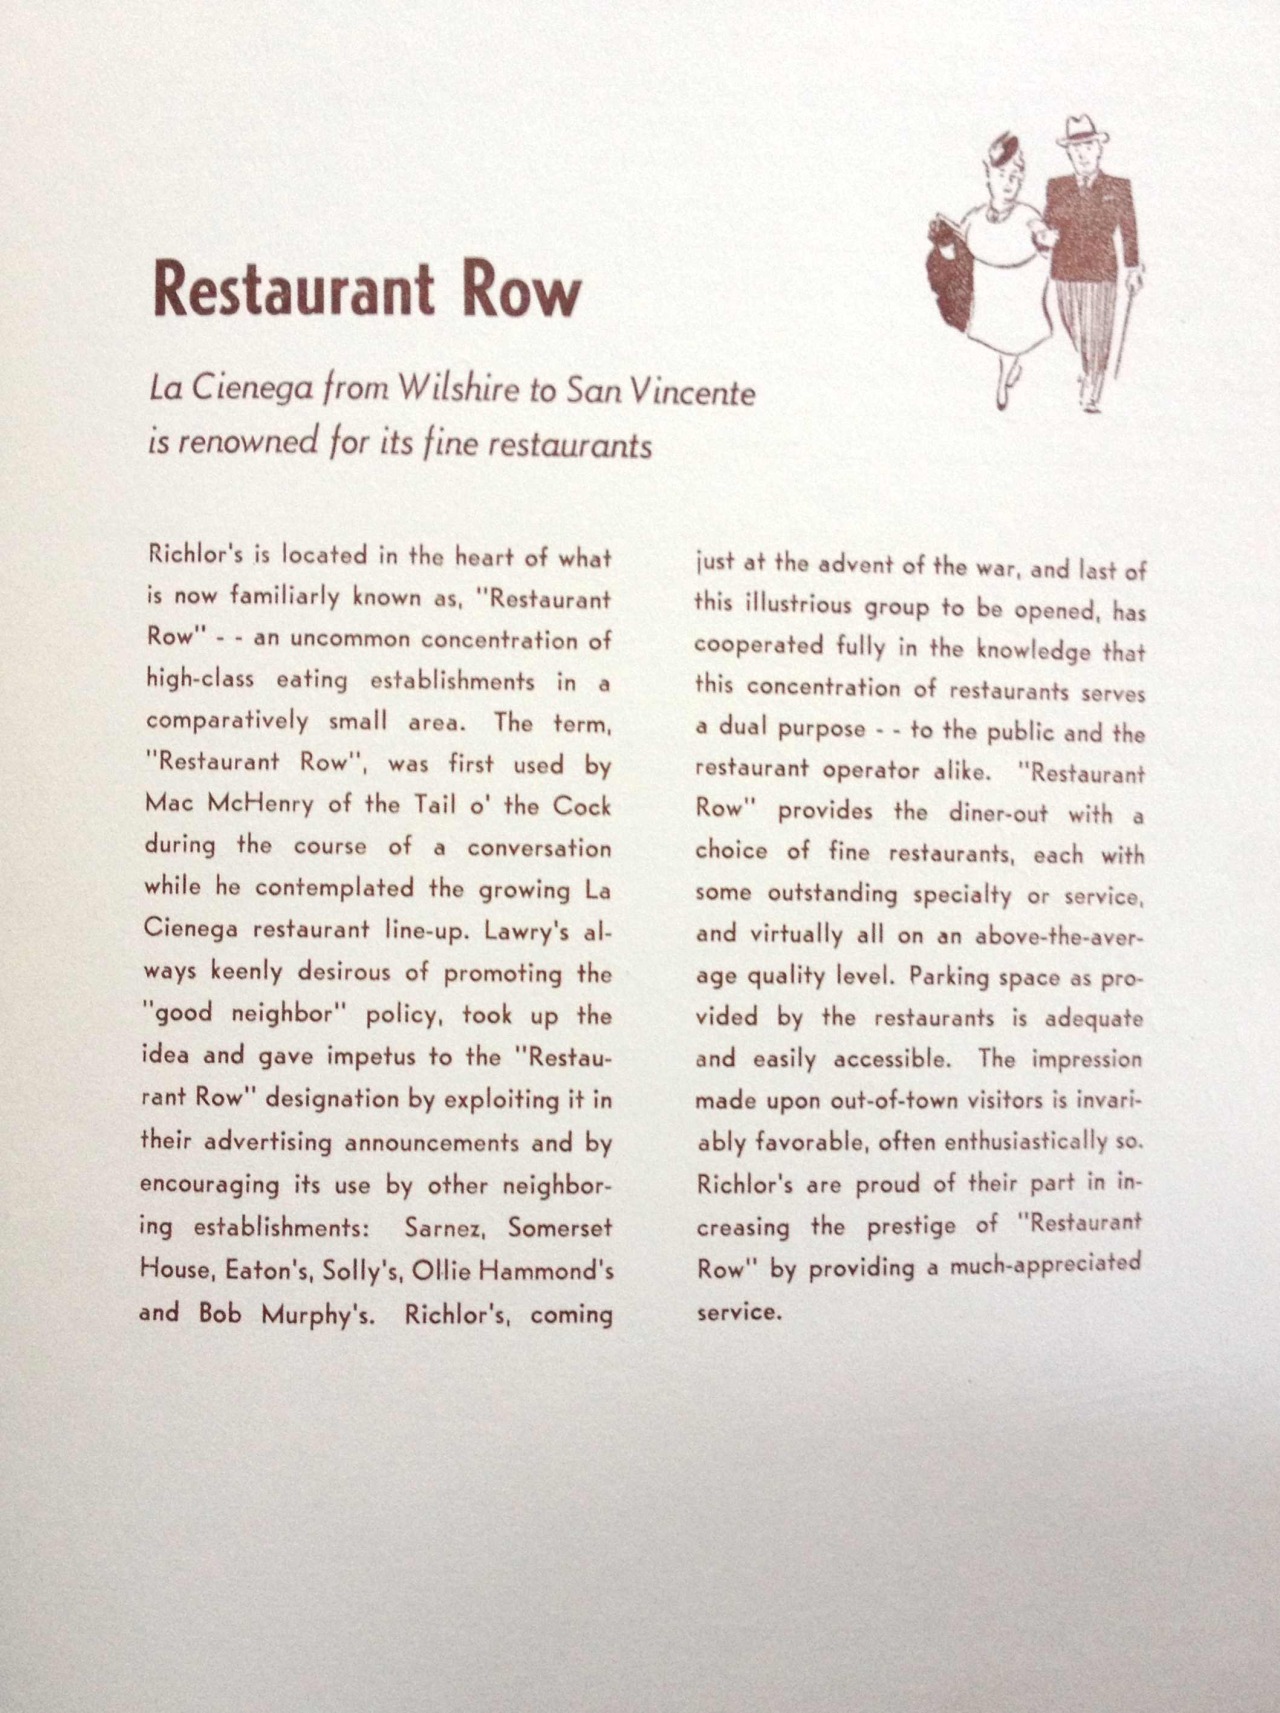 From a 1940s menu of Richlor’s, home of the planked hamburger steak, meat ground “virtually” to order. Self-promo at its finest: working hard to be seen as fine dining. The accompanying illustration is a good indication of what “fine dining” patrons...